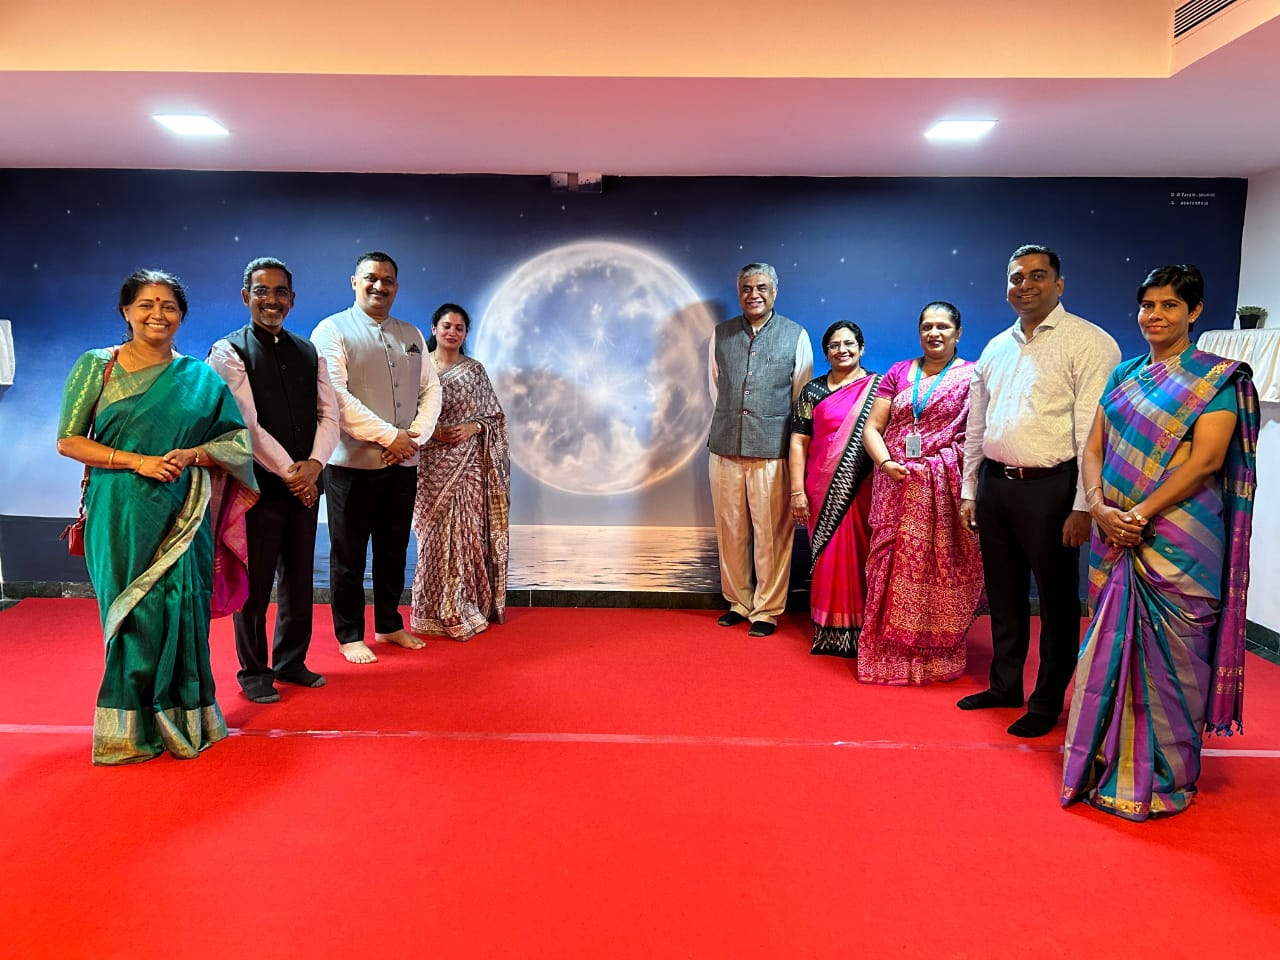 BGS Gleneagles Hospital, Bengaluru becomes One of the First Corporate Hospitals in India to Introduce Integrative Medicine and Research Department